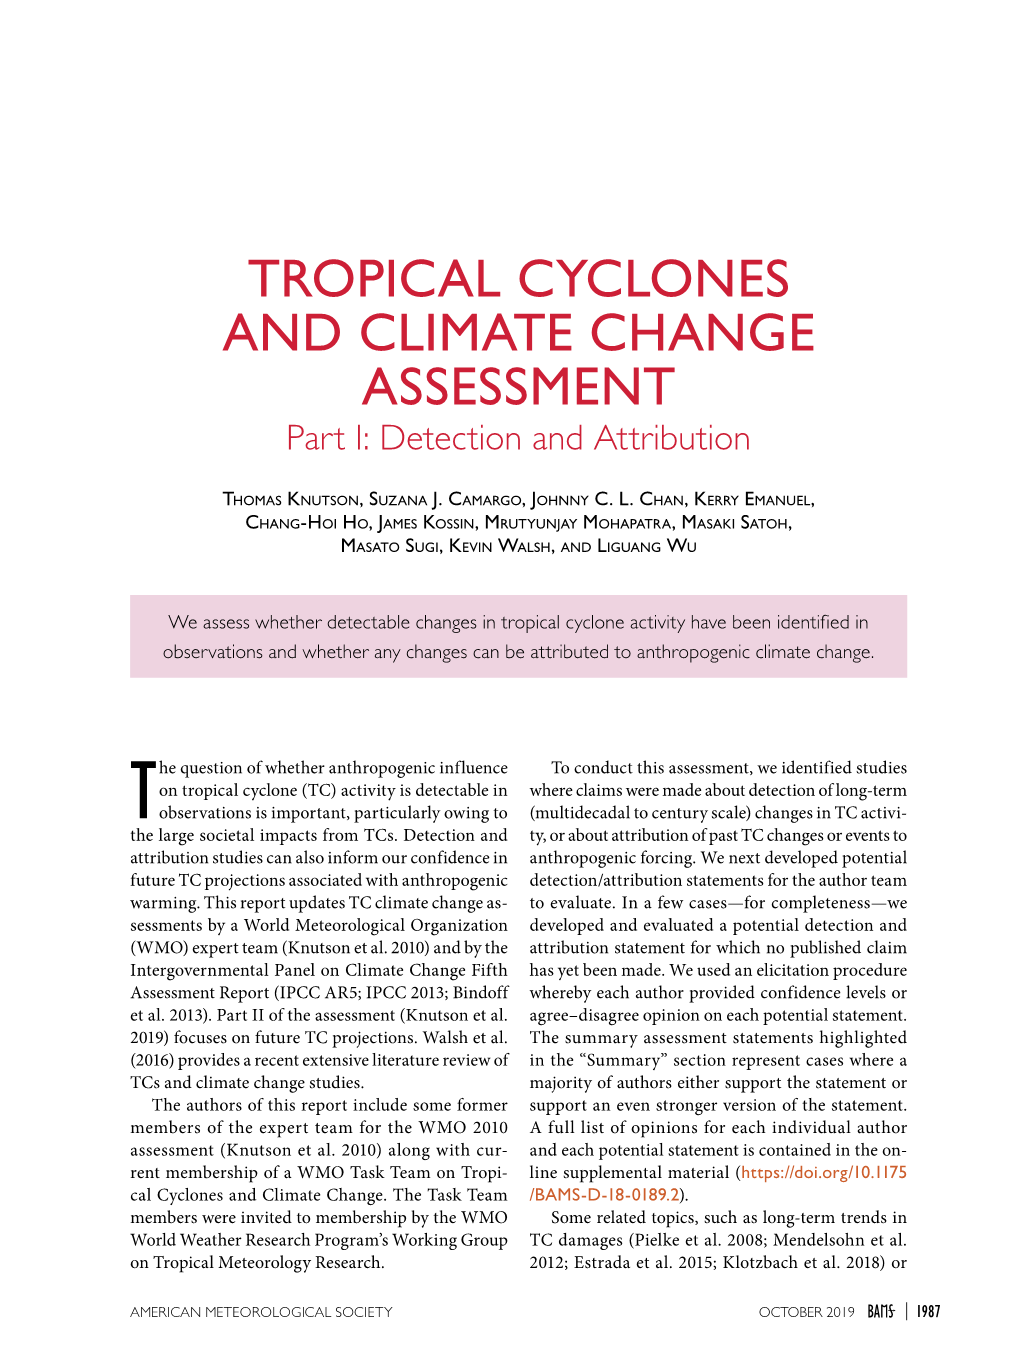 TROPICAL CYCLONES and CLIMATE CHANGE ASSESSMENT Part I: Detection and Attribution